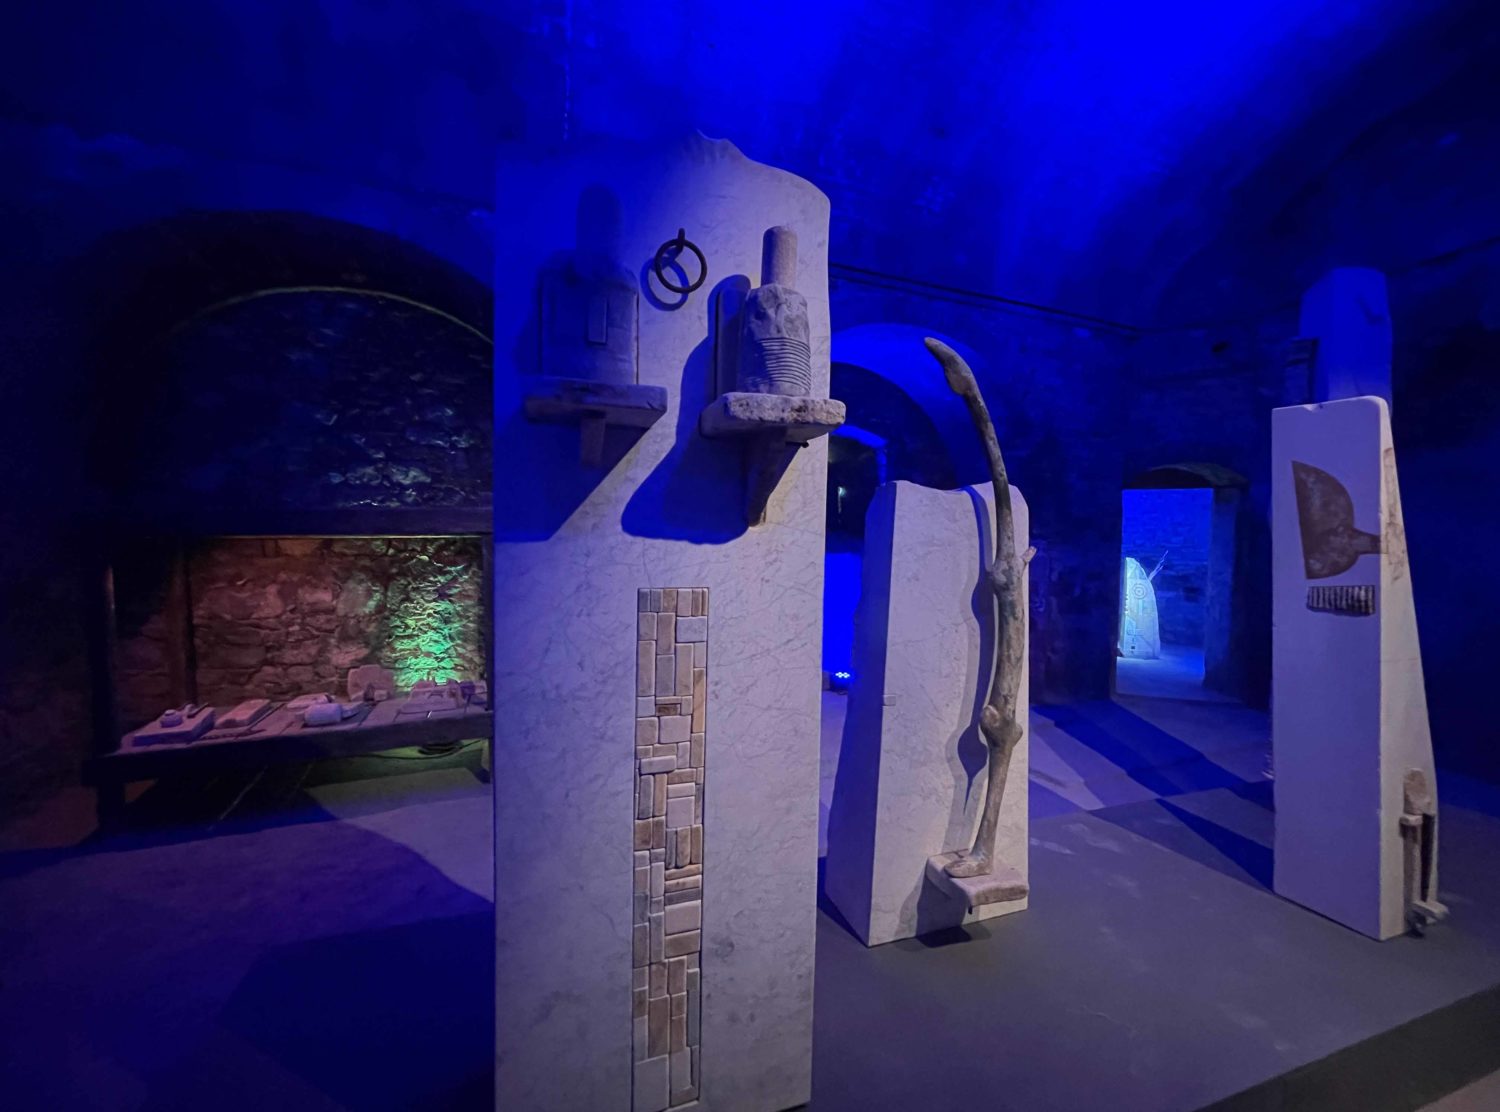 Castelfalfi In partnership with Alberto Bartalini, Castelfalfi converted the old cellar into an art gallery. This season's show is titled 